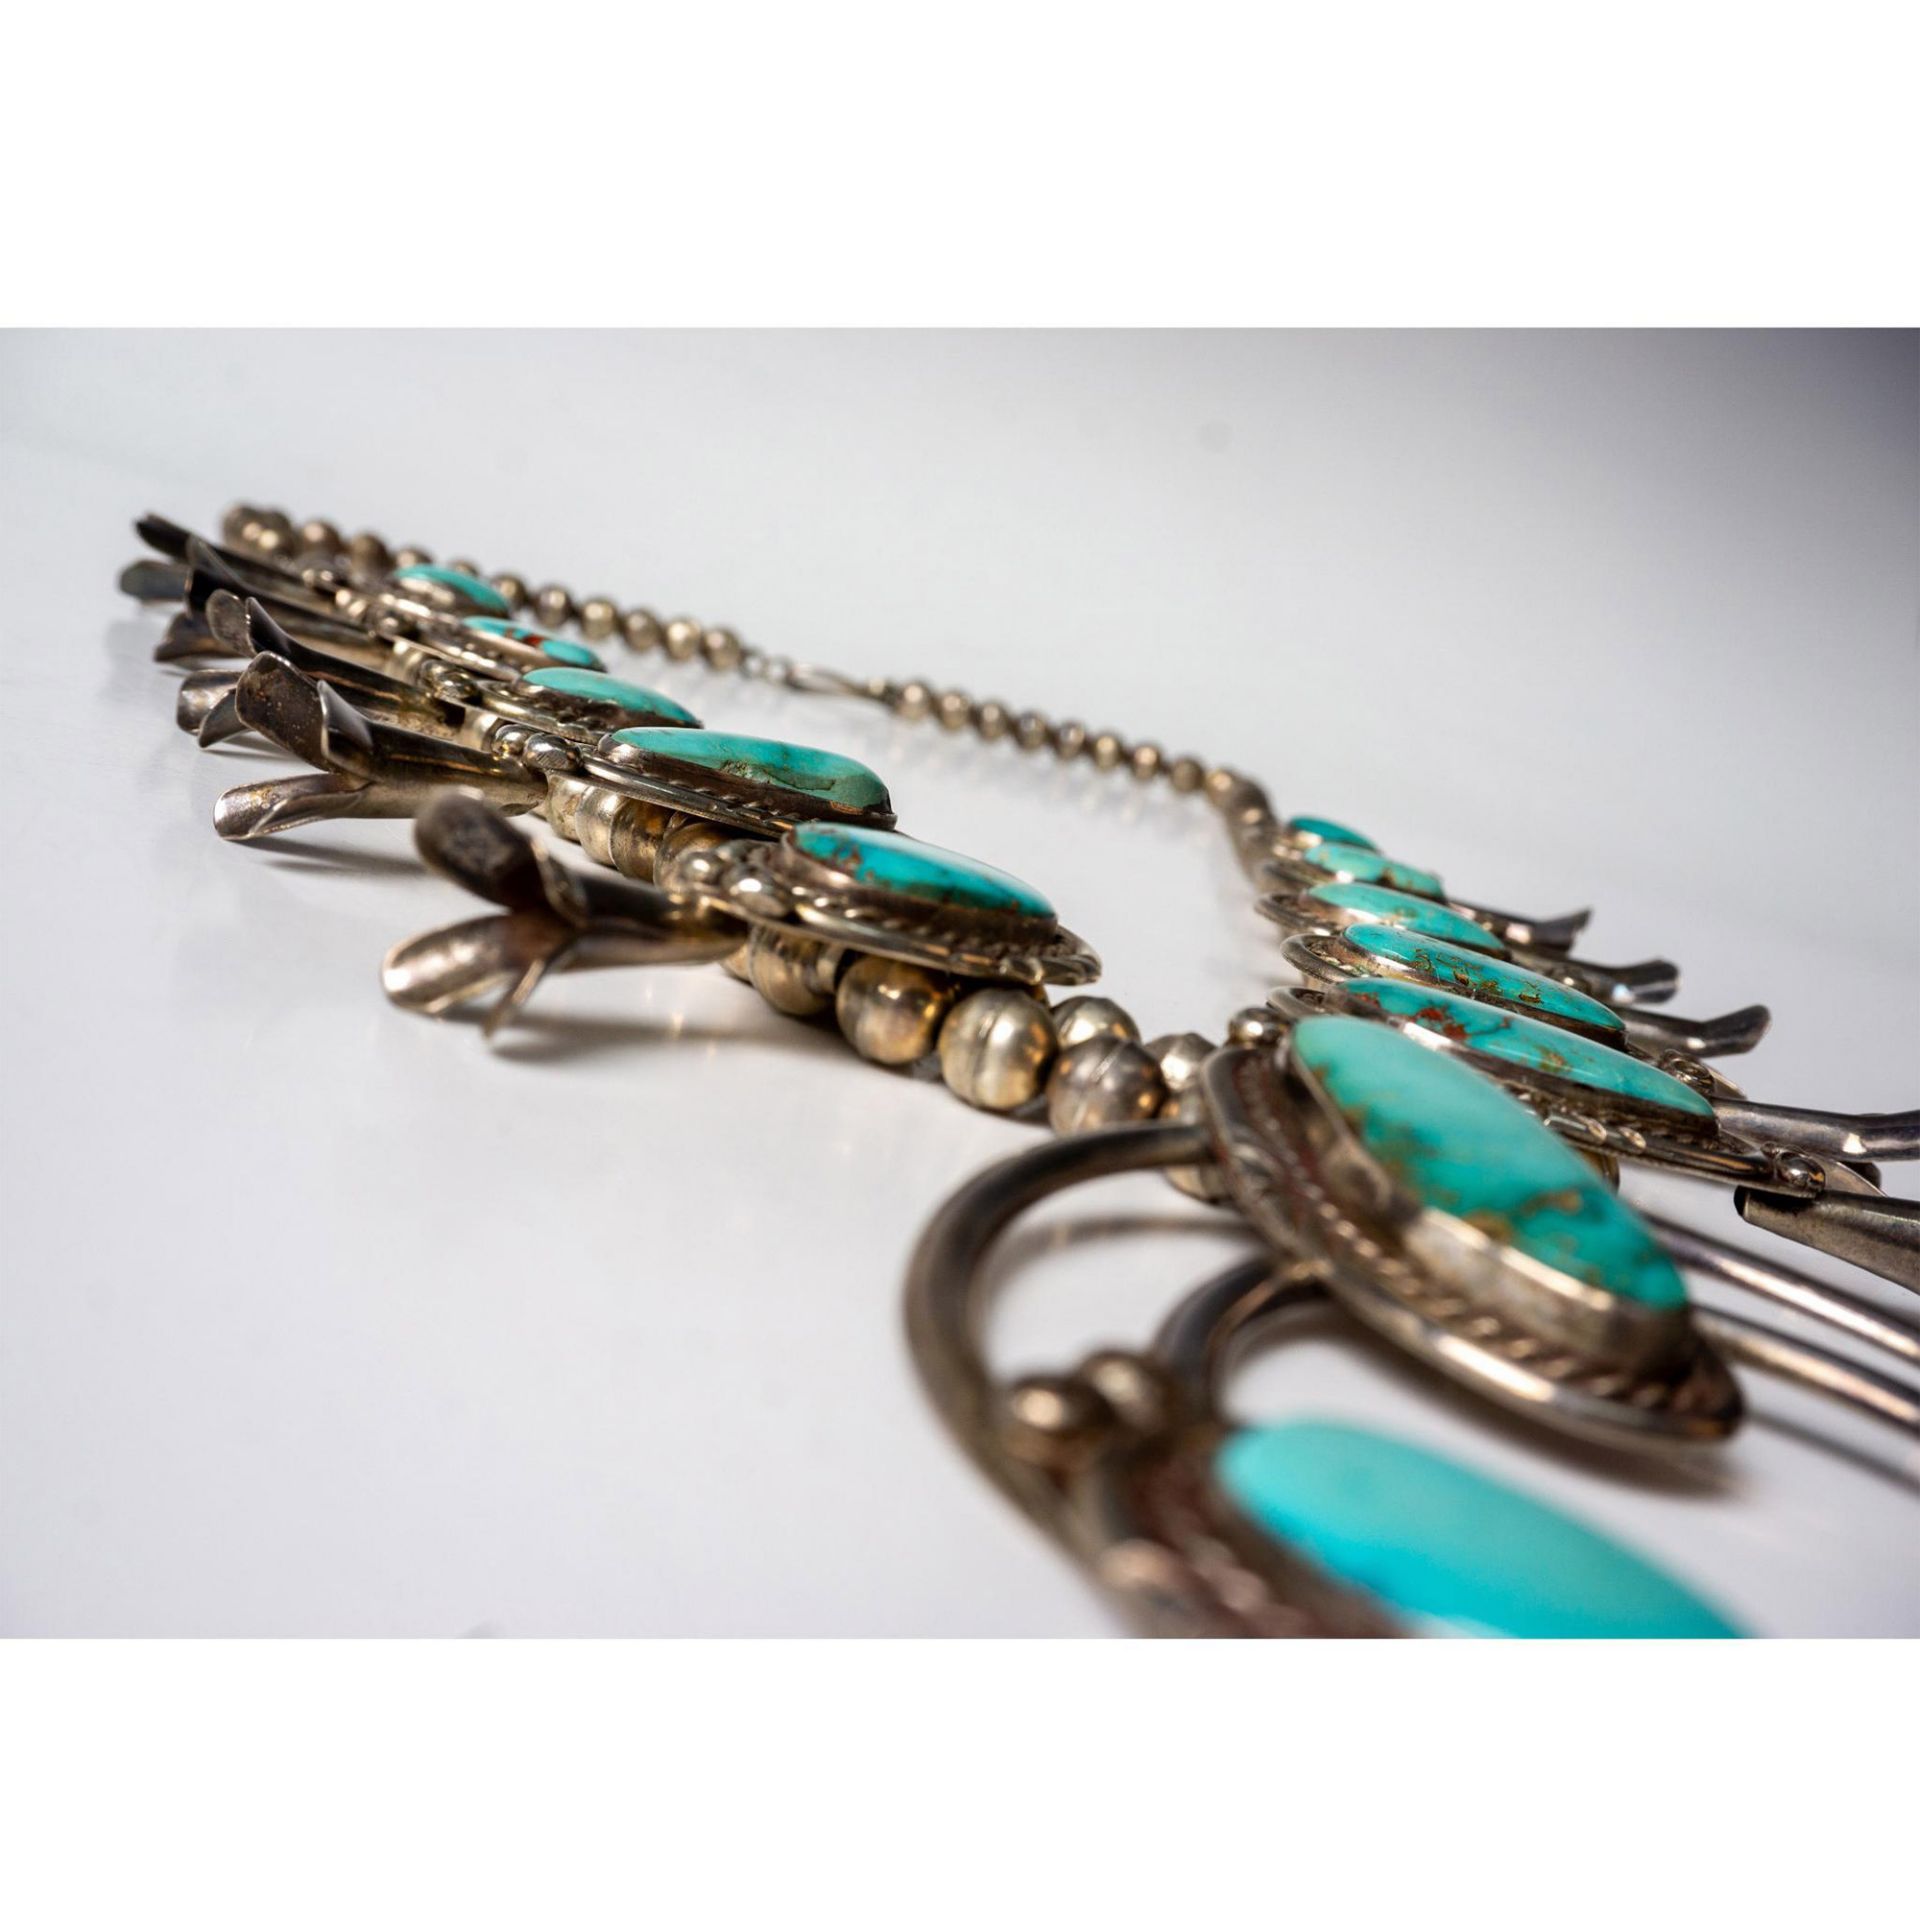 Navajo Sterling Squash Blossom Necklace - Image 3 of 5